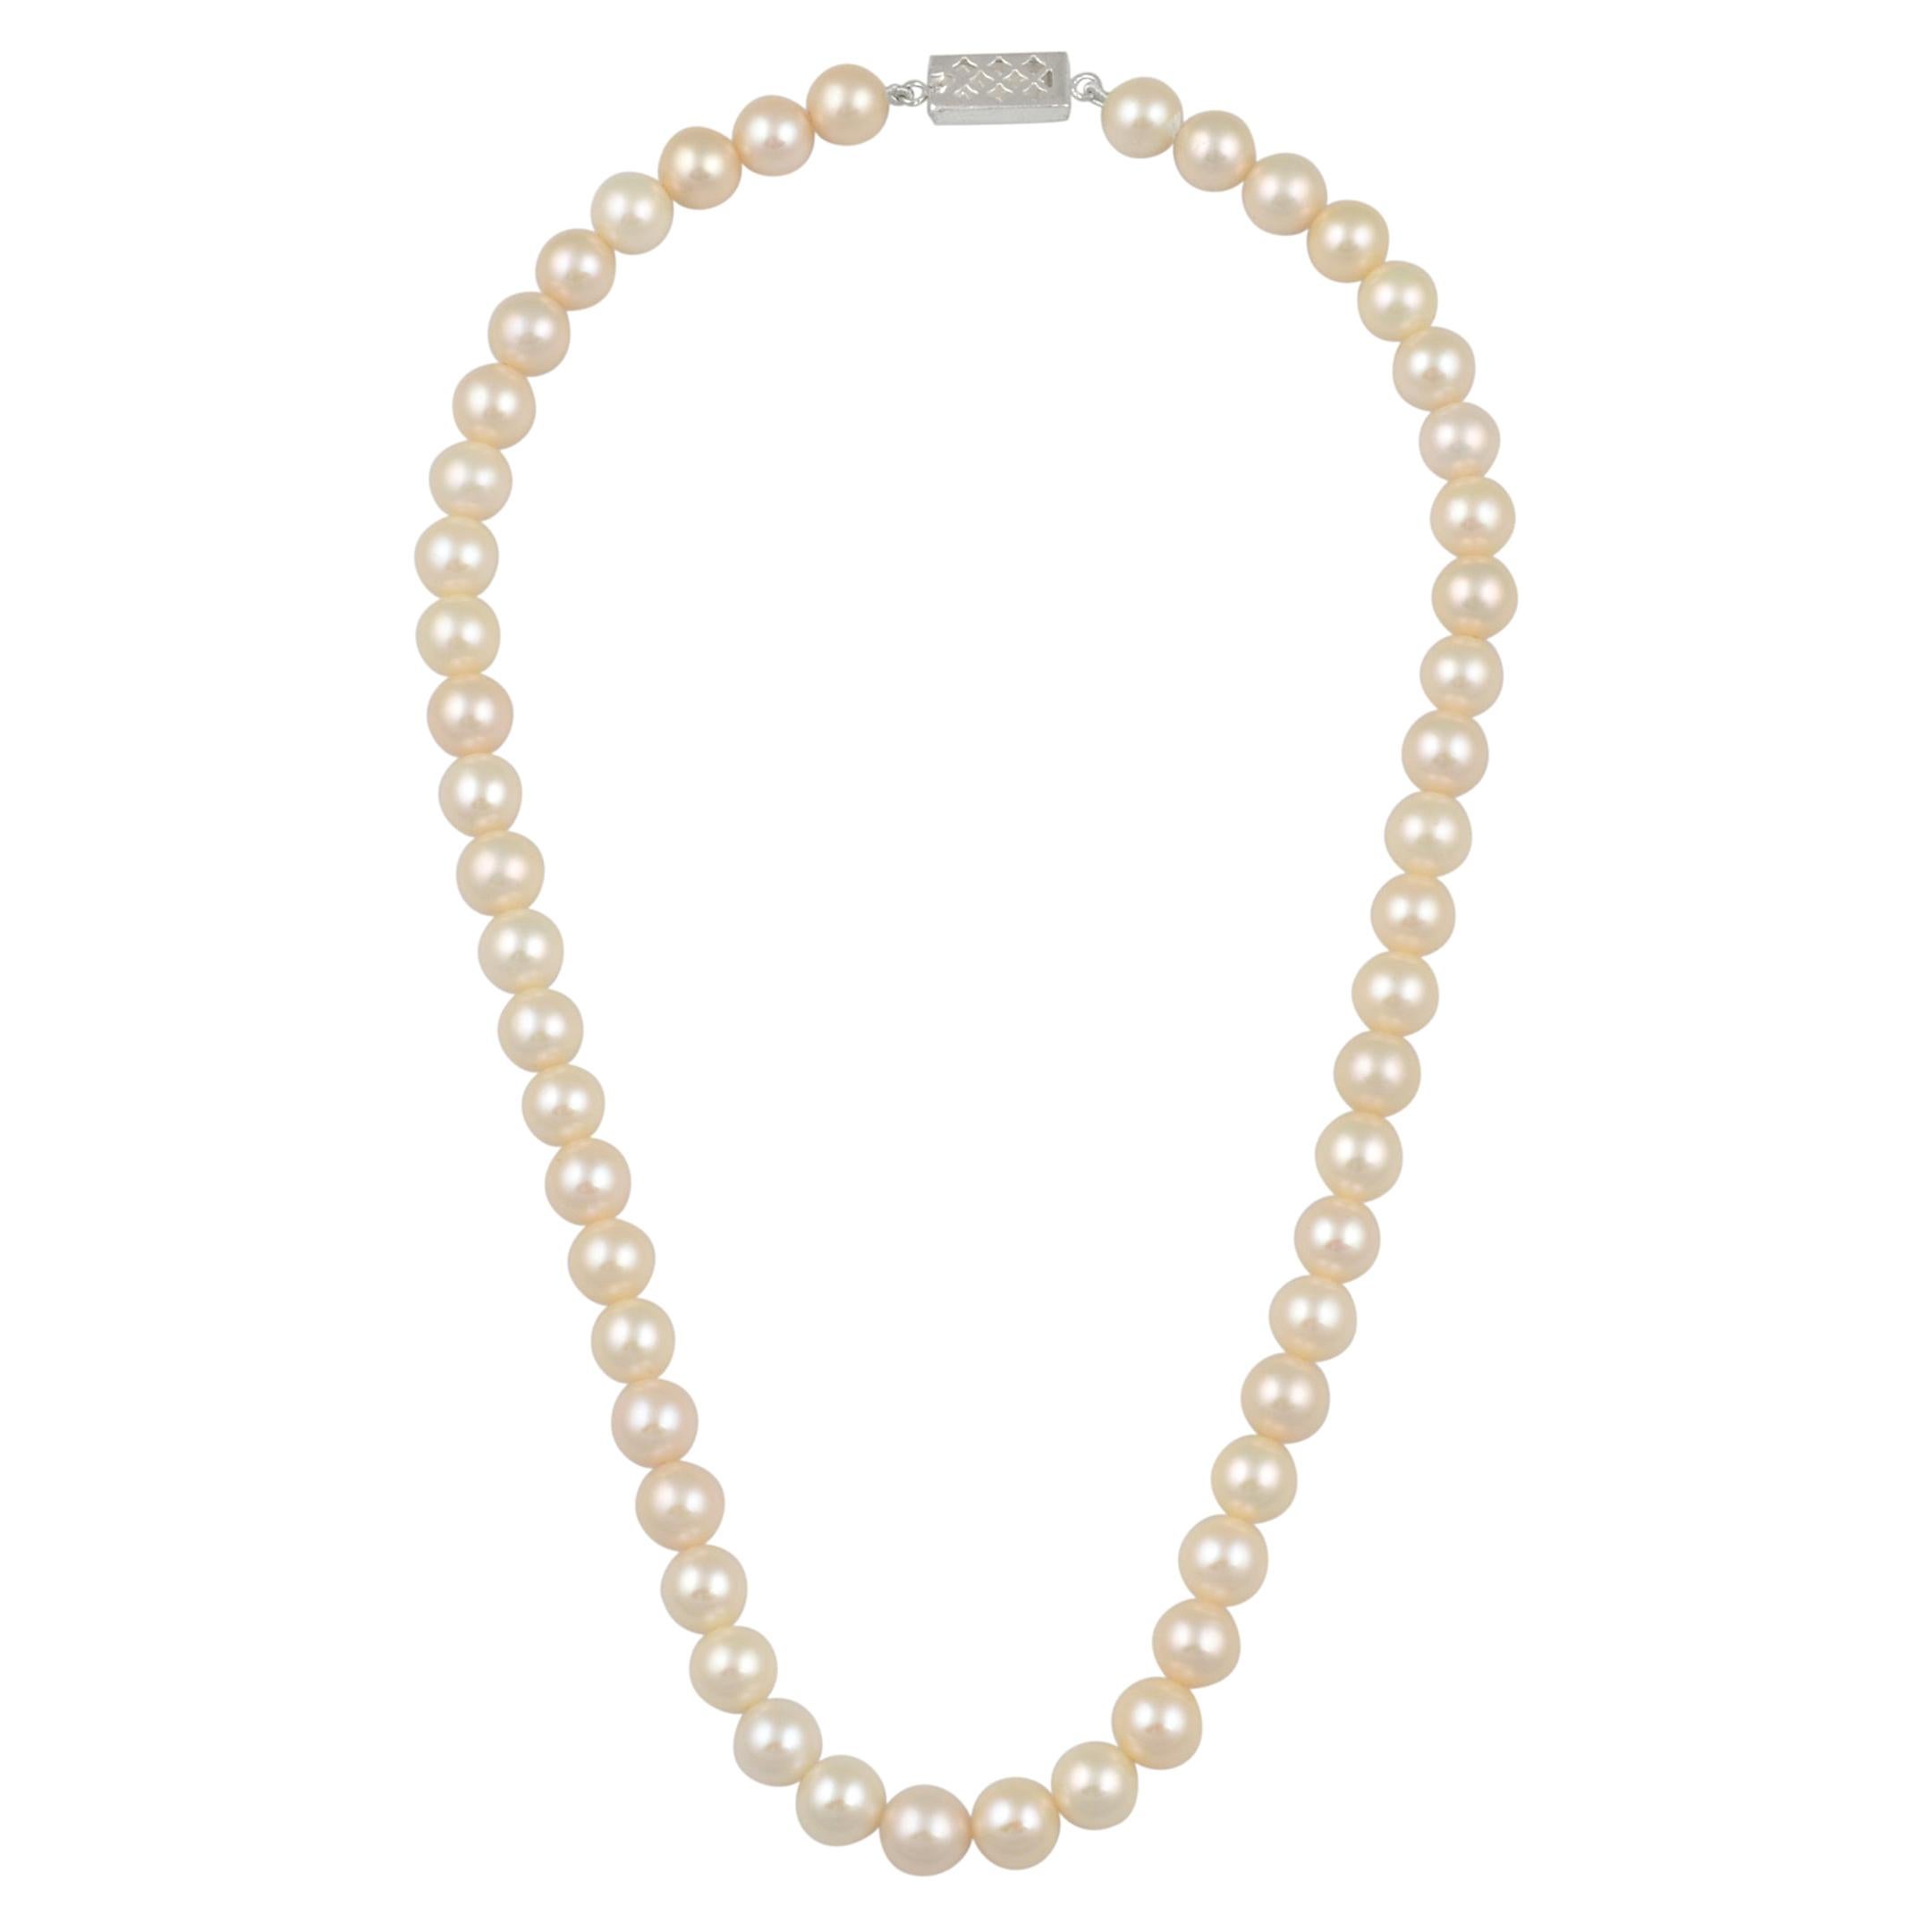 51 Round White Fresh Water  Pearls Strand Necklace Set in Silver Clasp